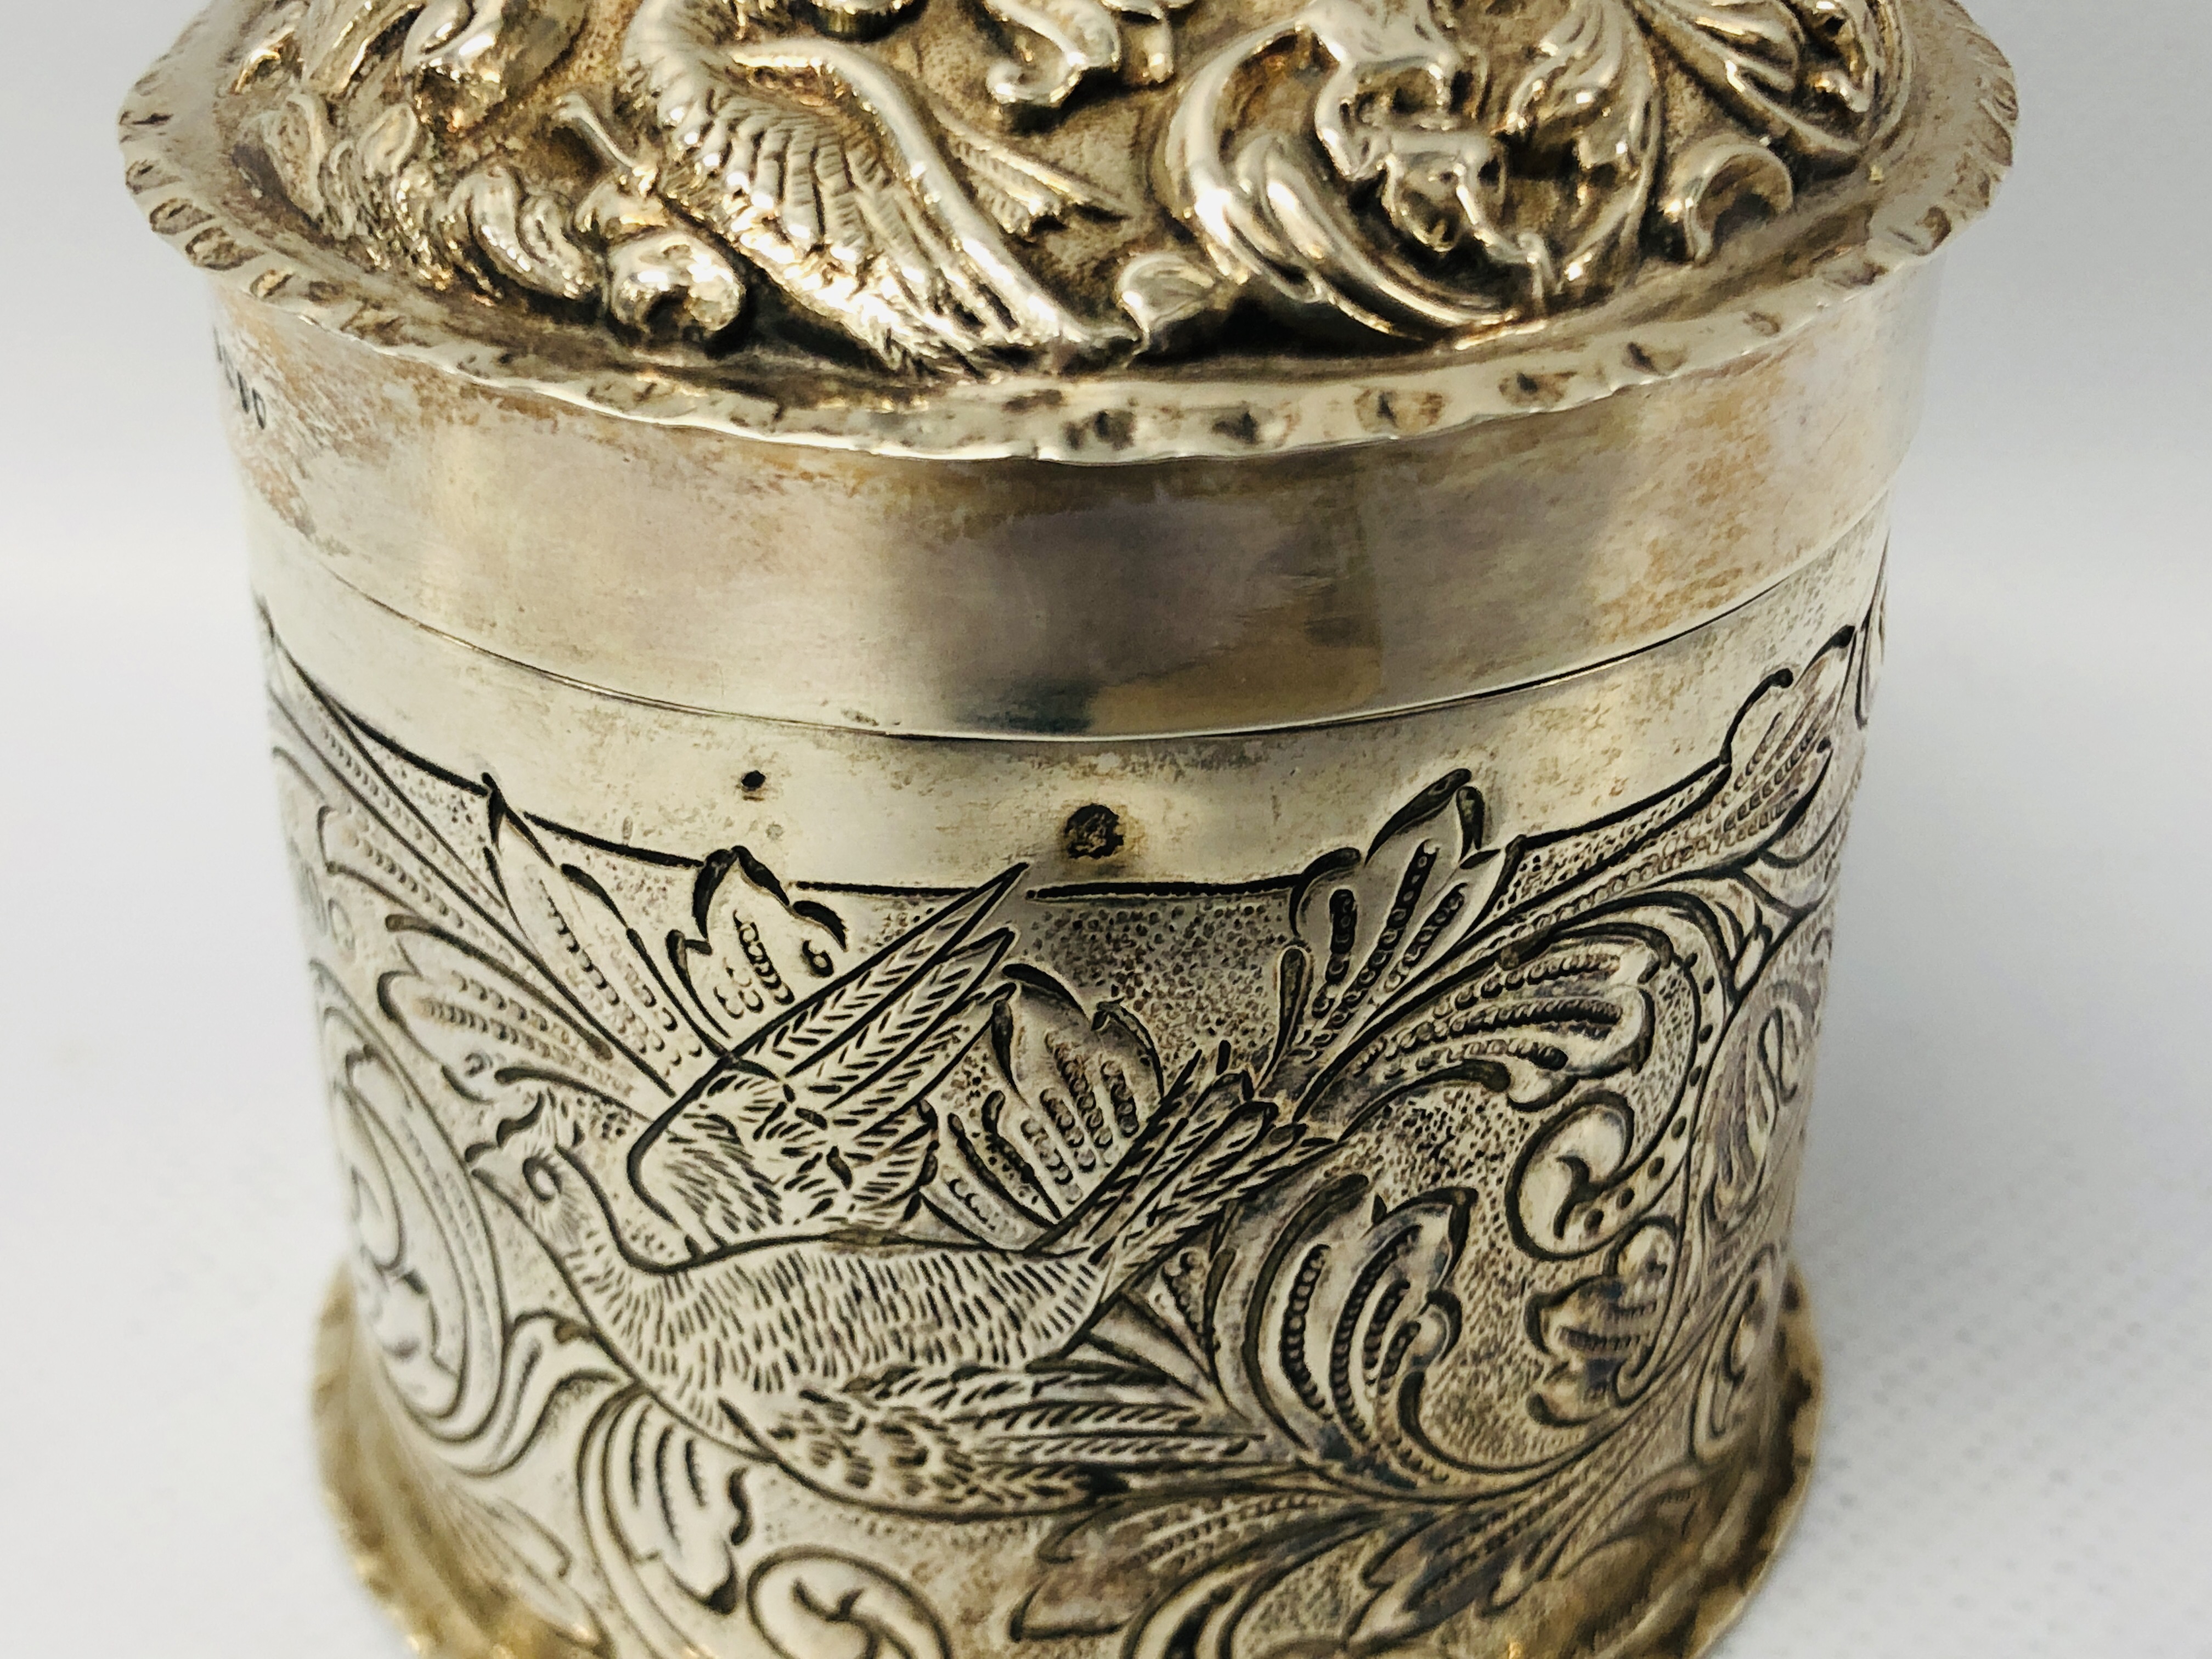 A VICTORIAN SILVER CYLINDRICAL BOX AND COVER DECORATED WITH BIRD LONDON 1888, WILLIAM COMINS - H 8. - Image 12 of 21